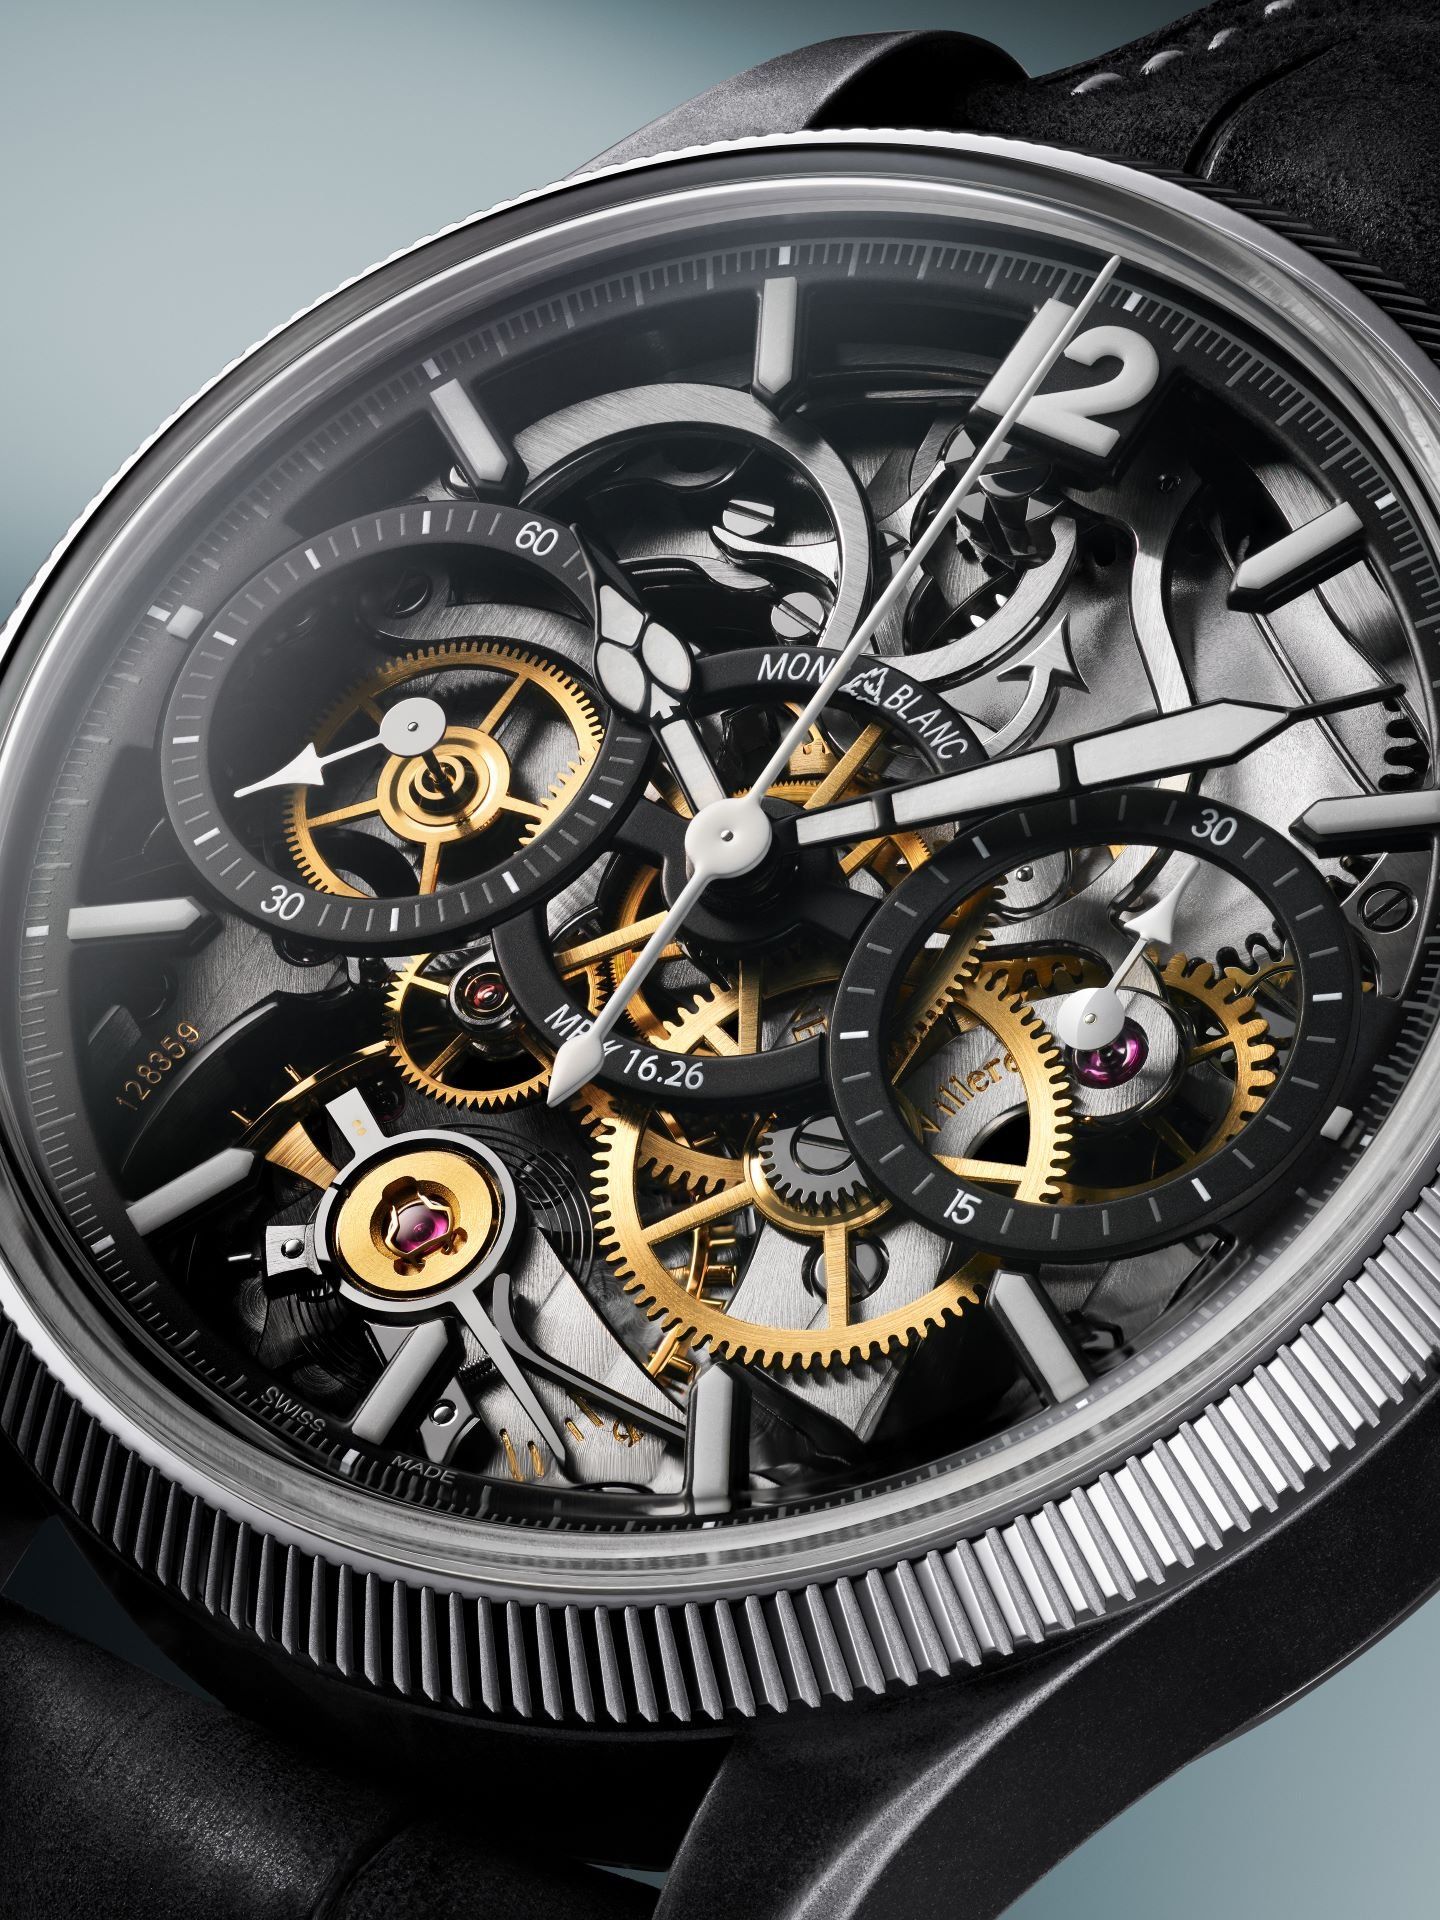 The New Montblanc Unveiled Secret Minerva Monopusher Chronograph - Limited Edition of 88